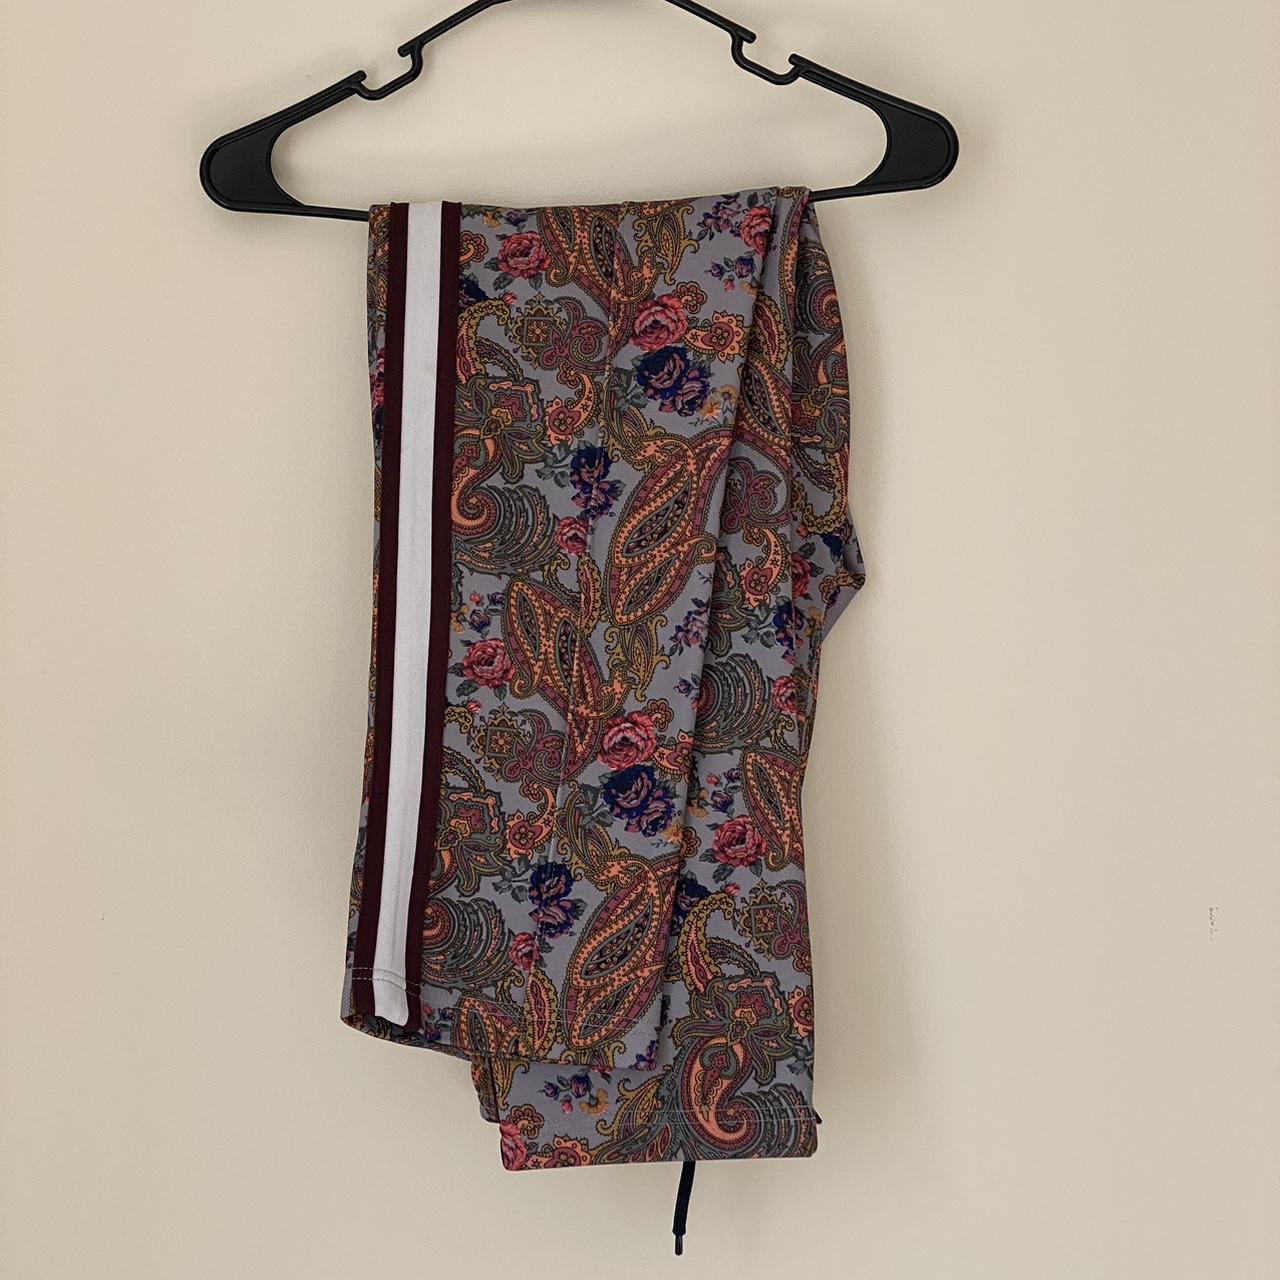 Urban Outfitters Uo Floral Paisley Bandana, $8 | Urban Outfitters |  Lookastic